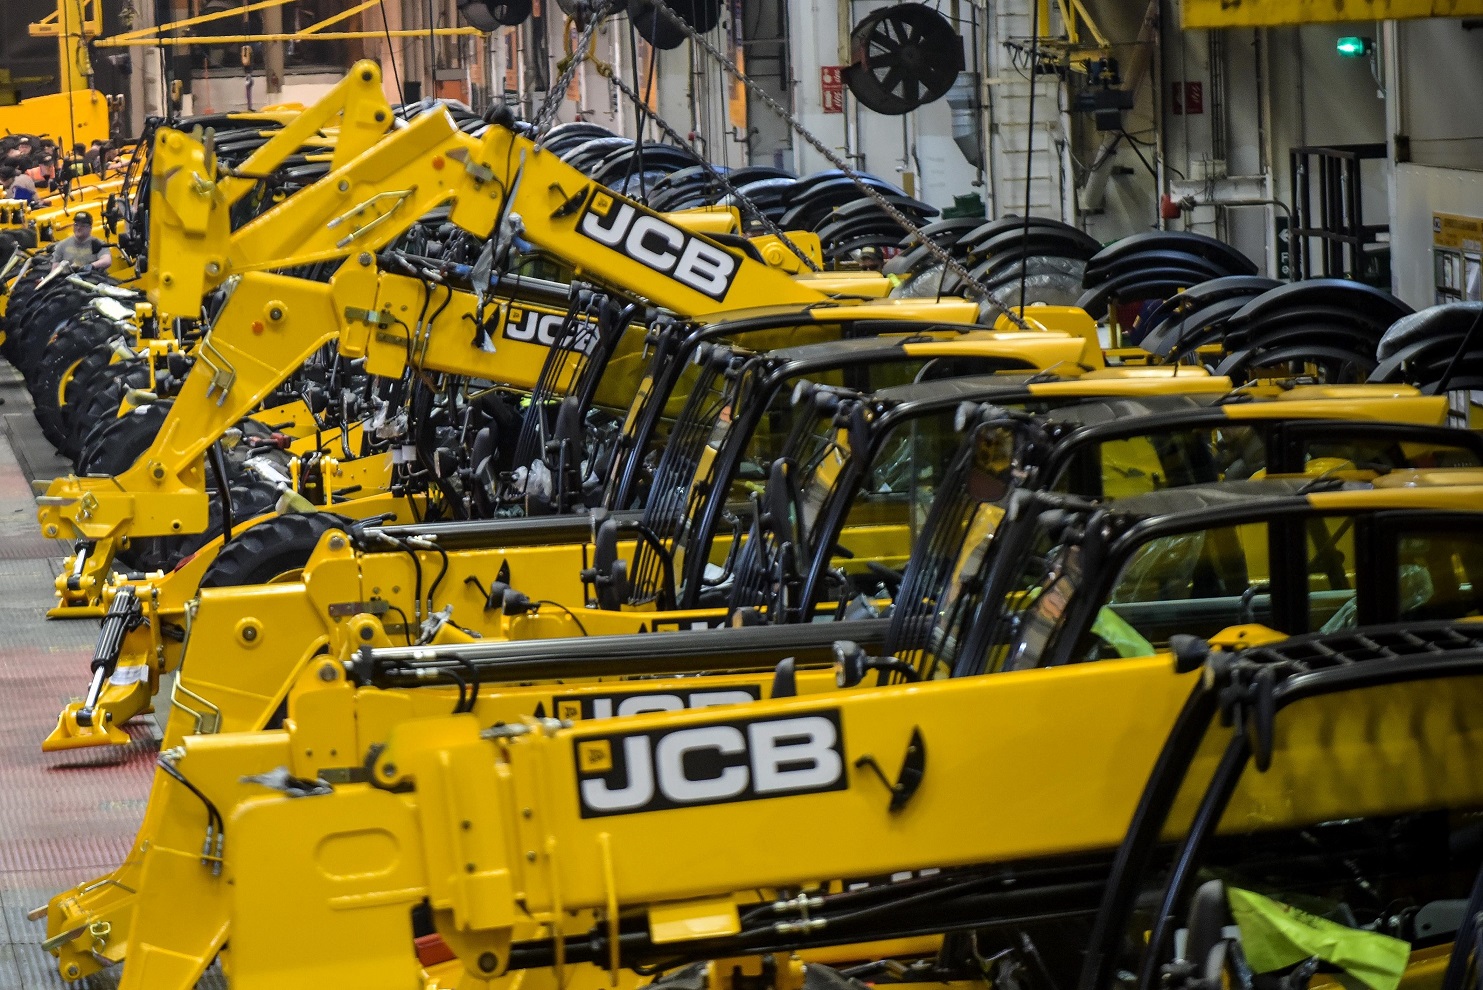 JCB says it will continue to monitor shipments of components from China